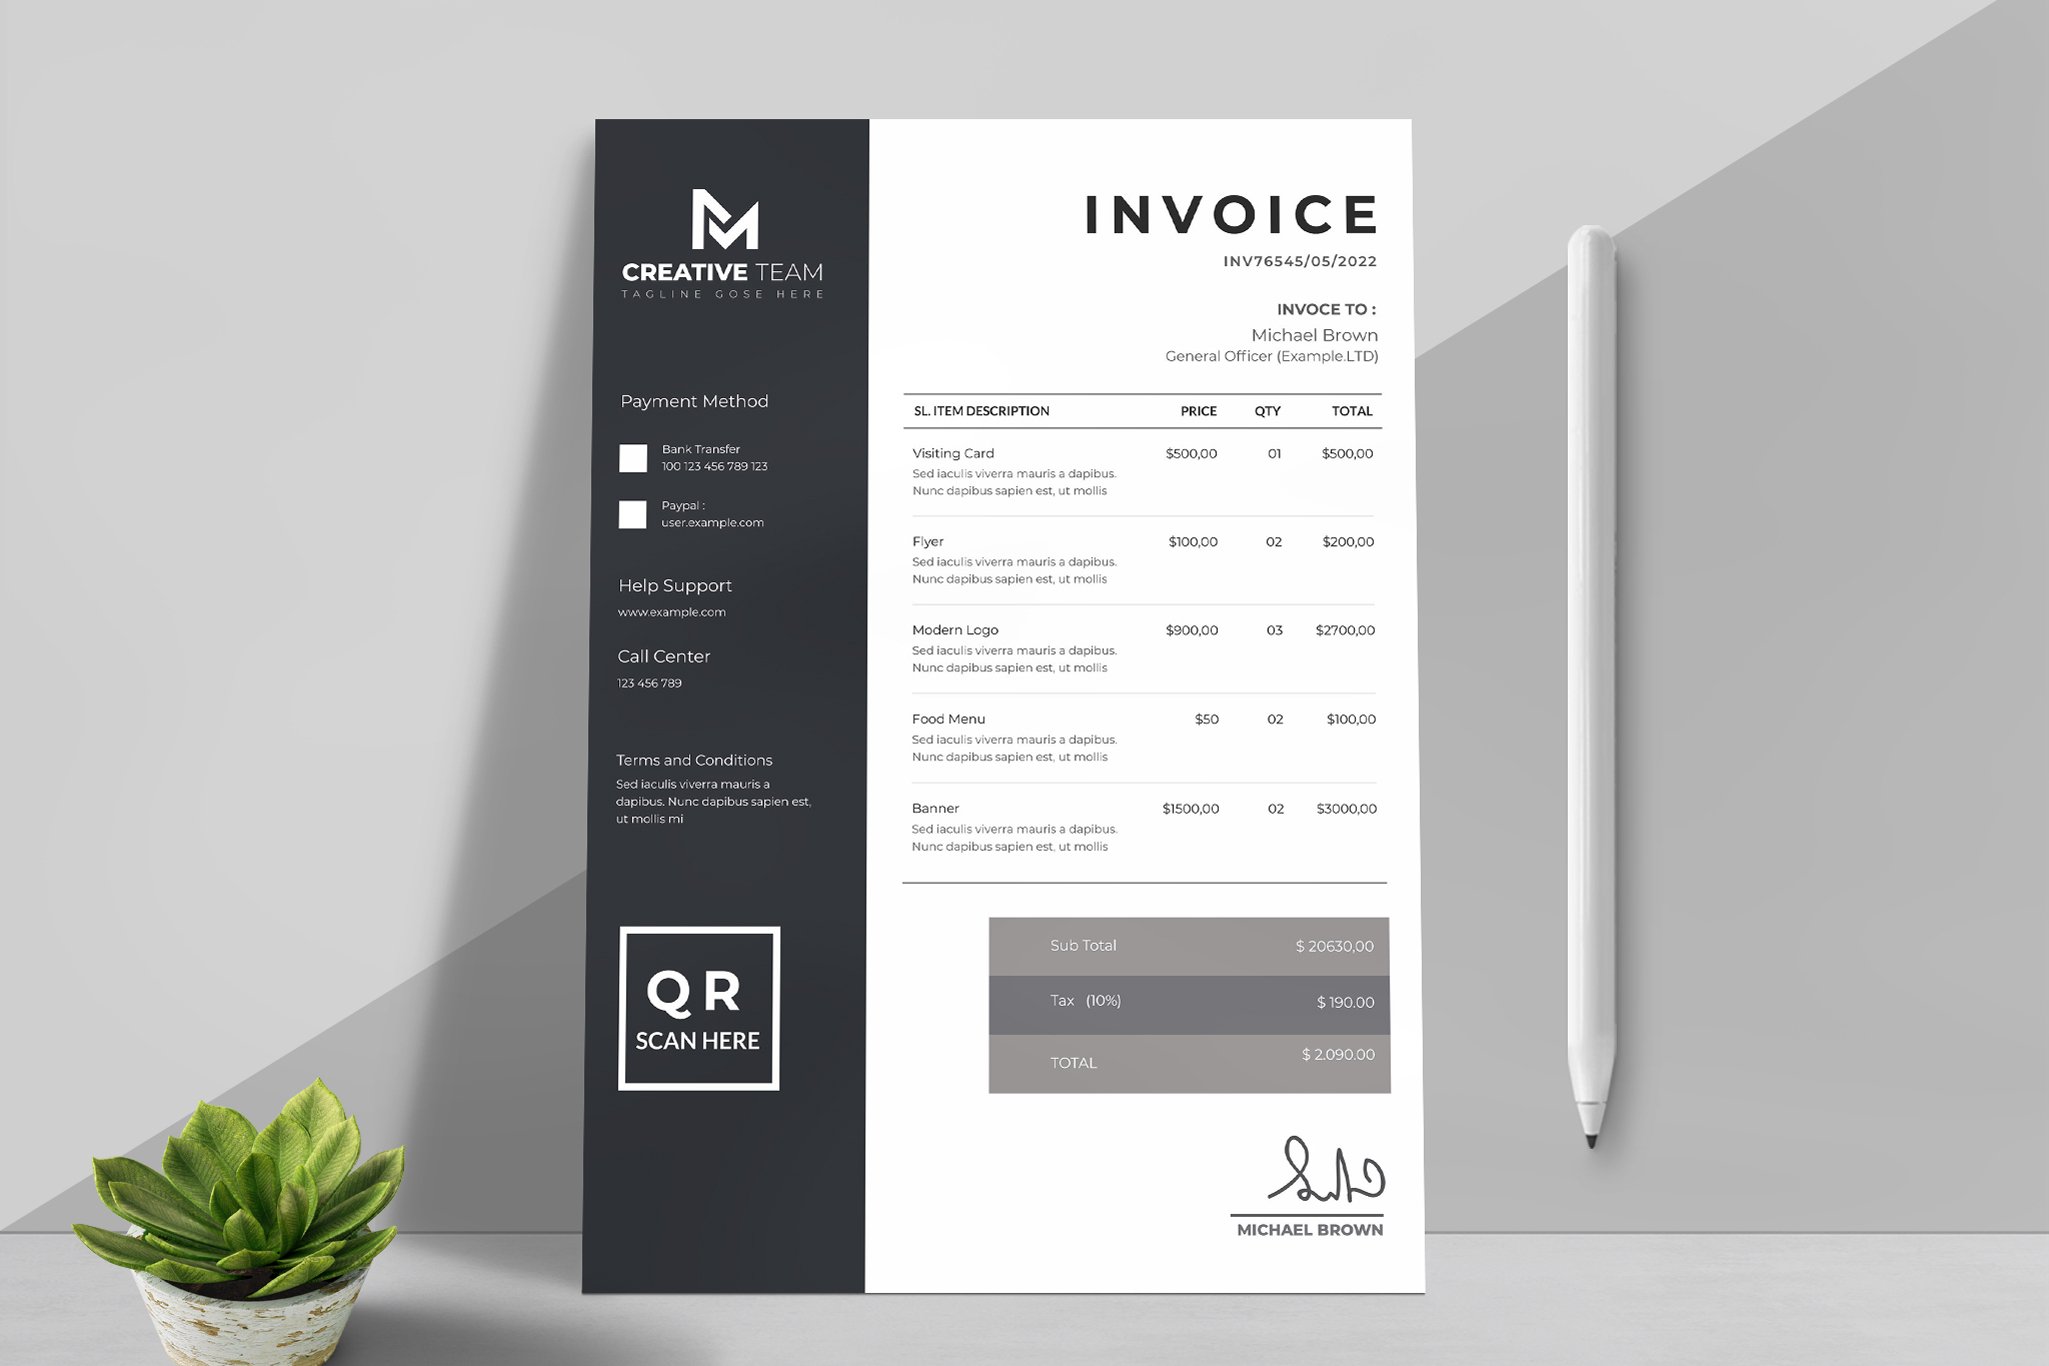 Invoice Template Layout cover image.